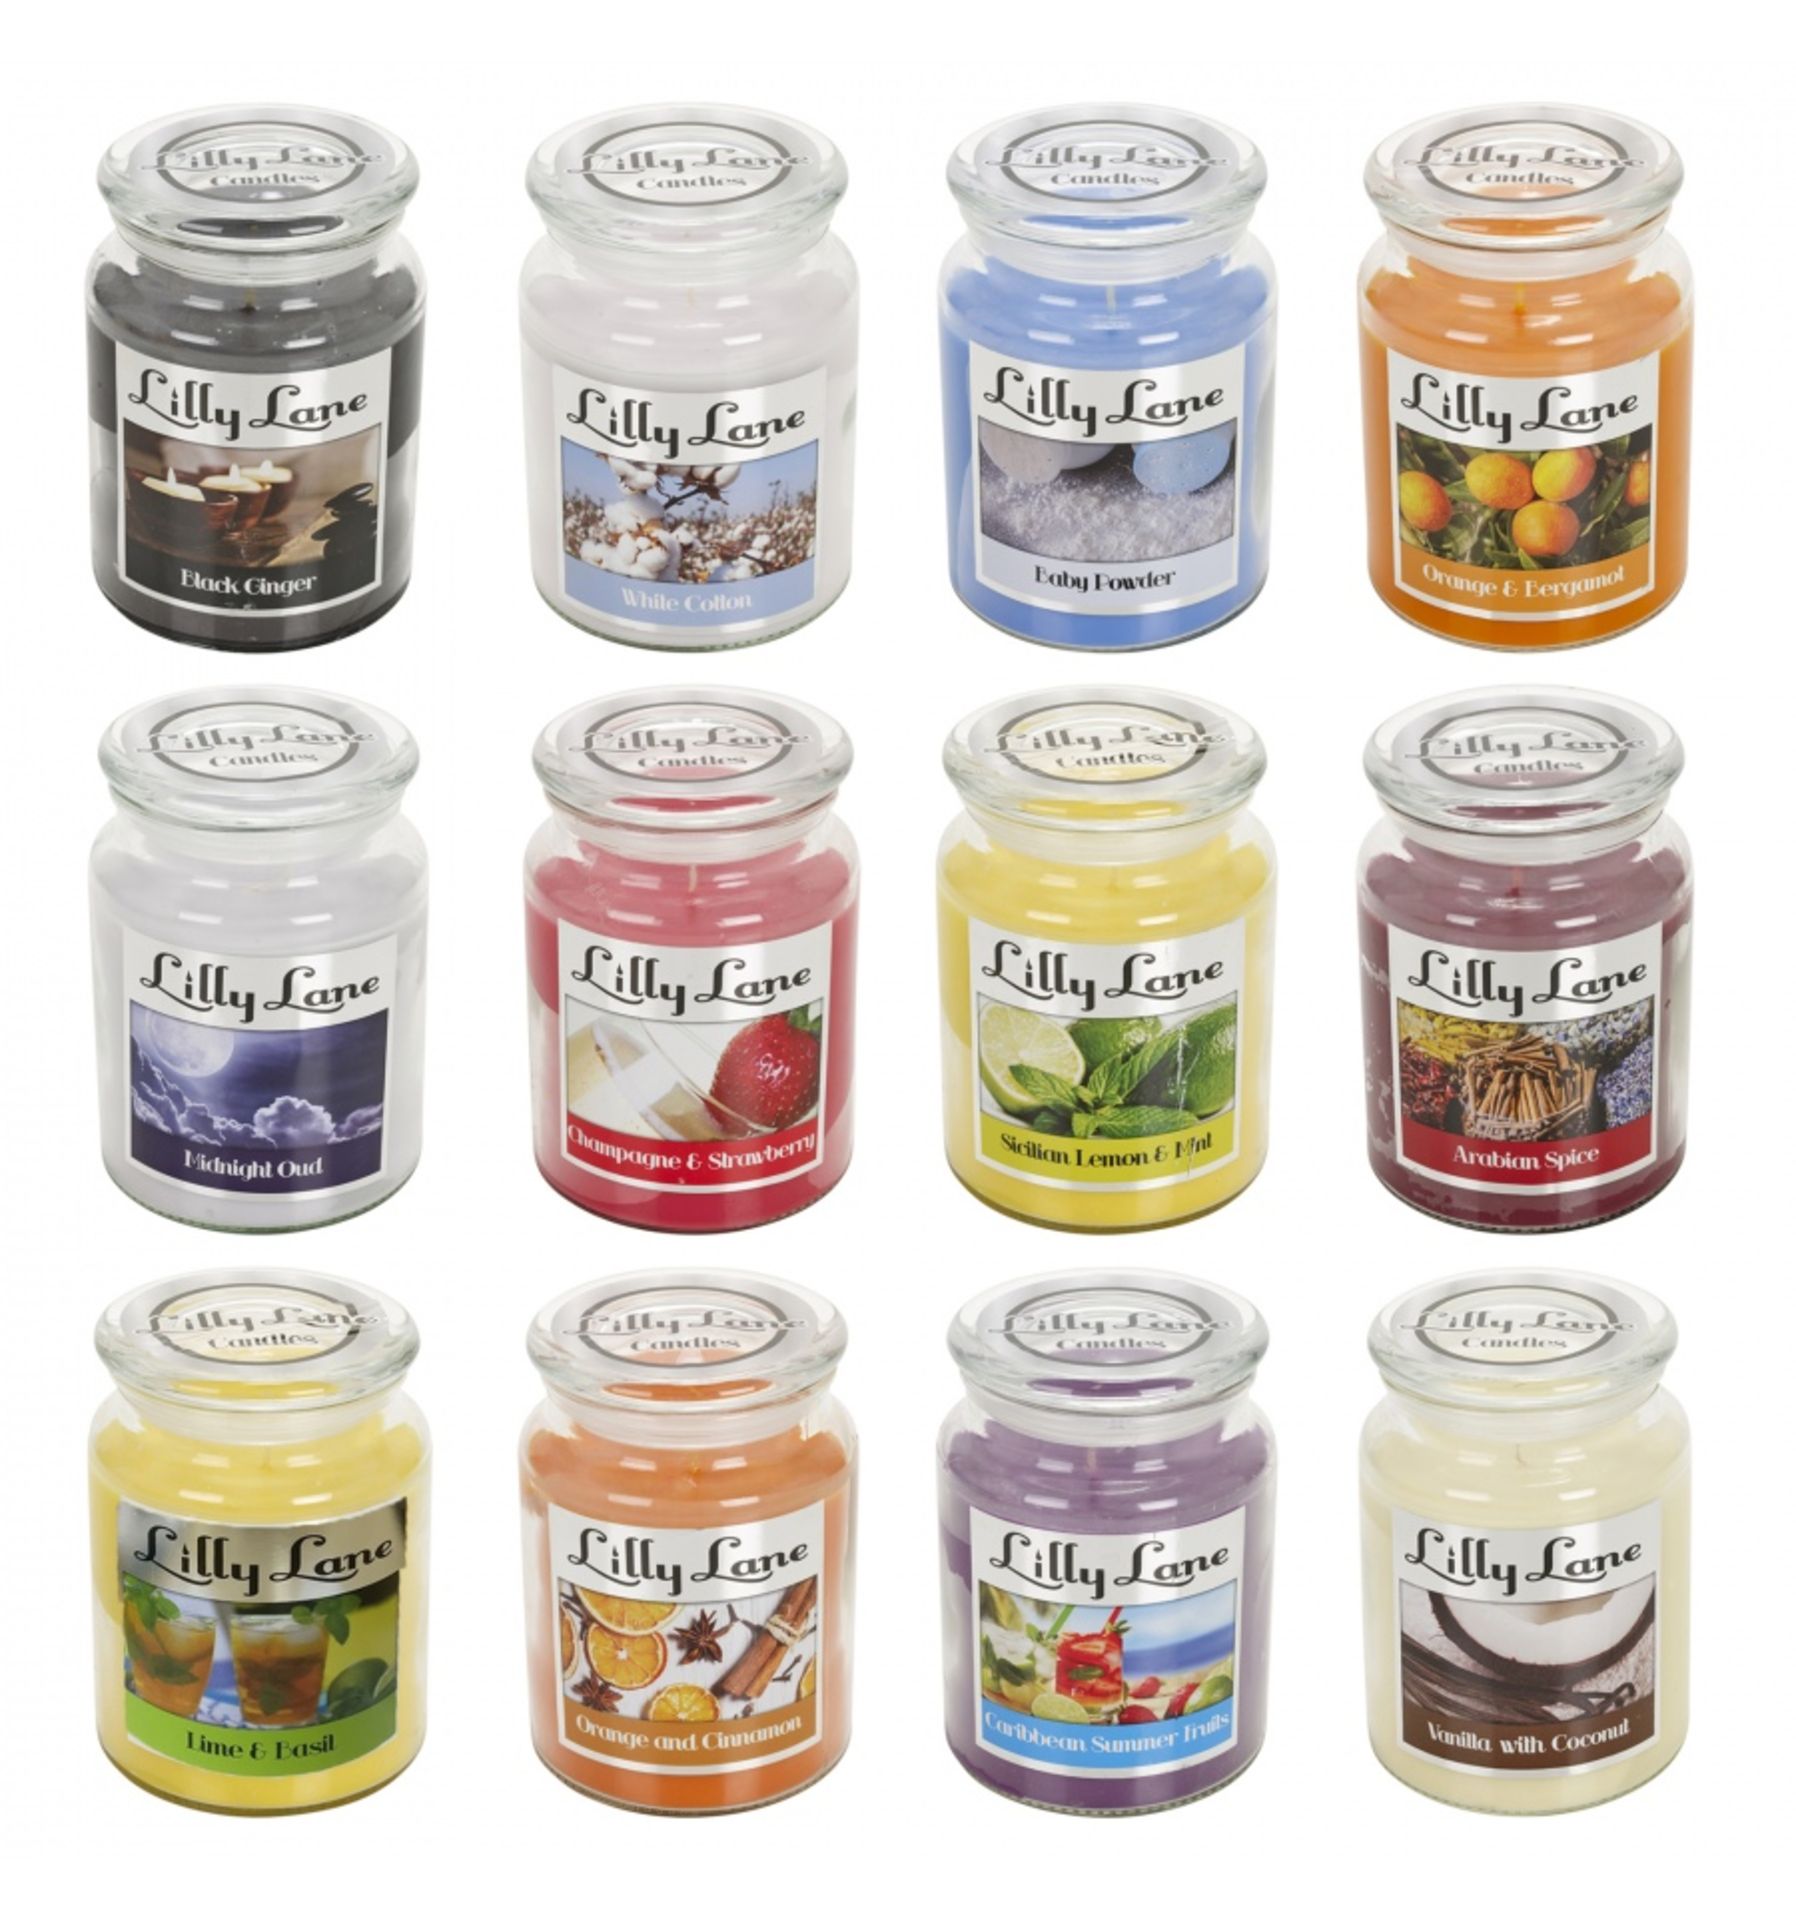 6pcs in carton brand new sealed Lilly Lane Hot Chocolate strong scented slow burn candles in glass